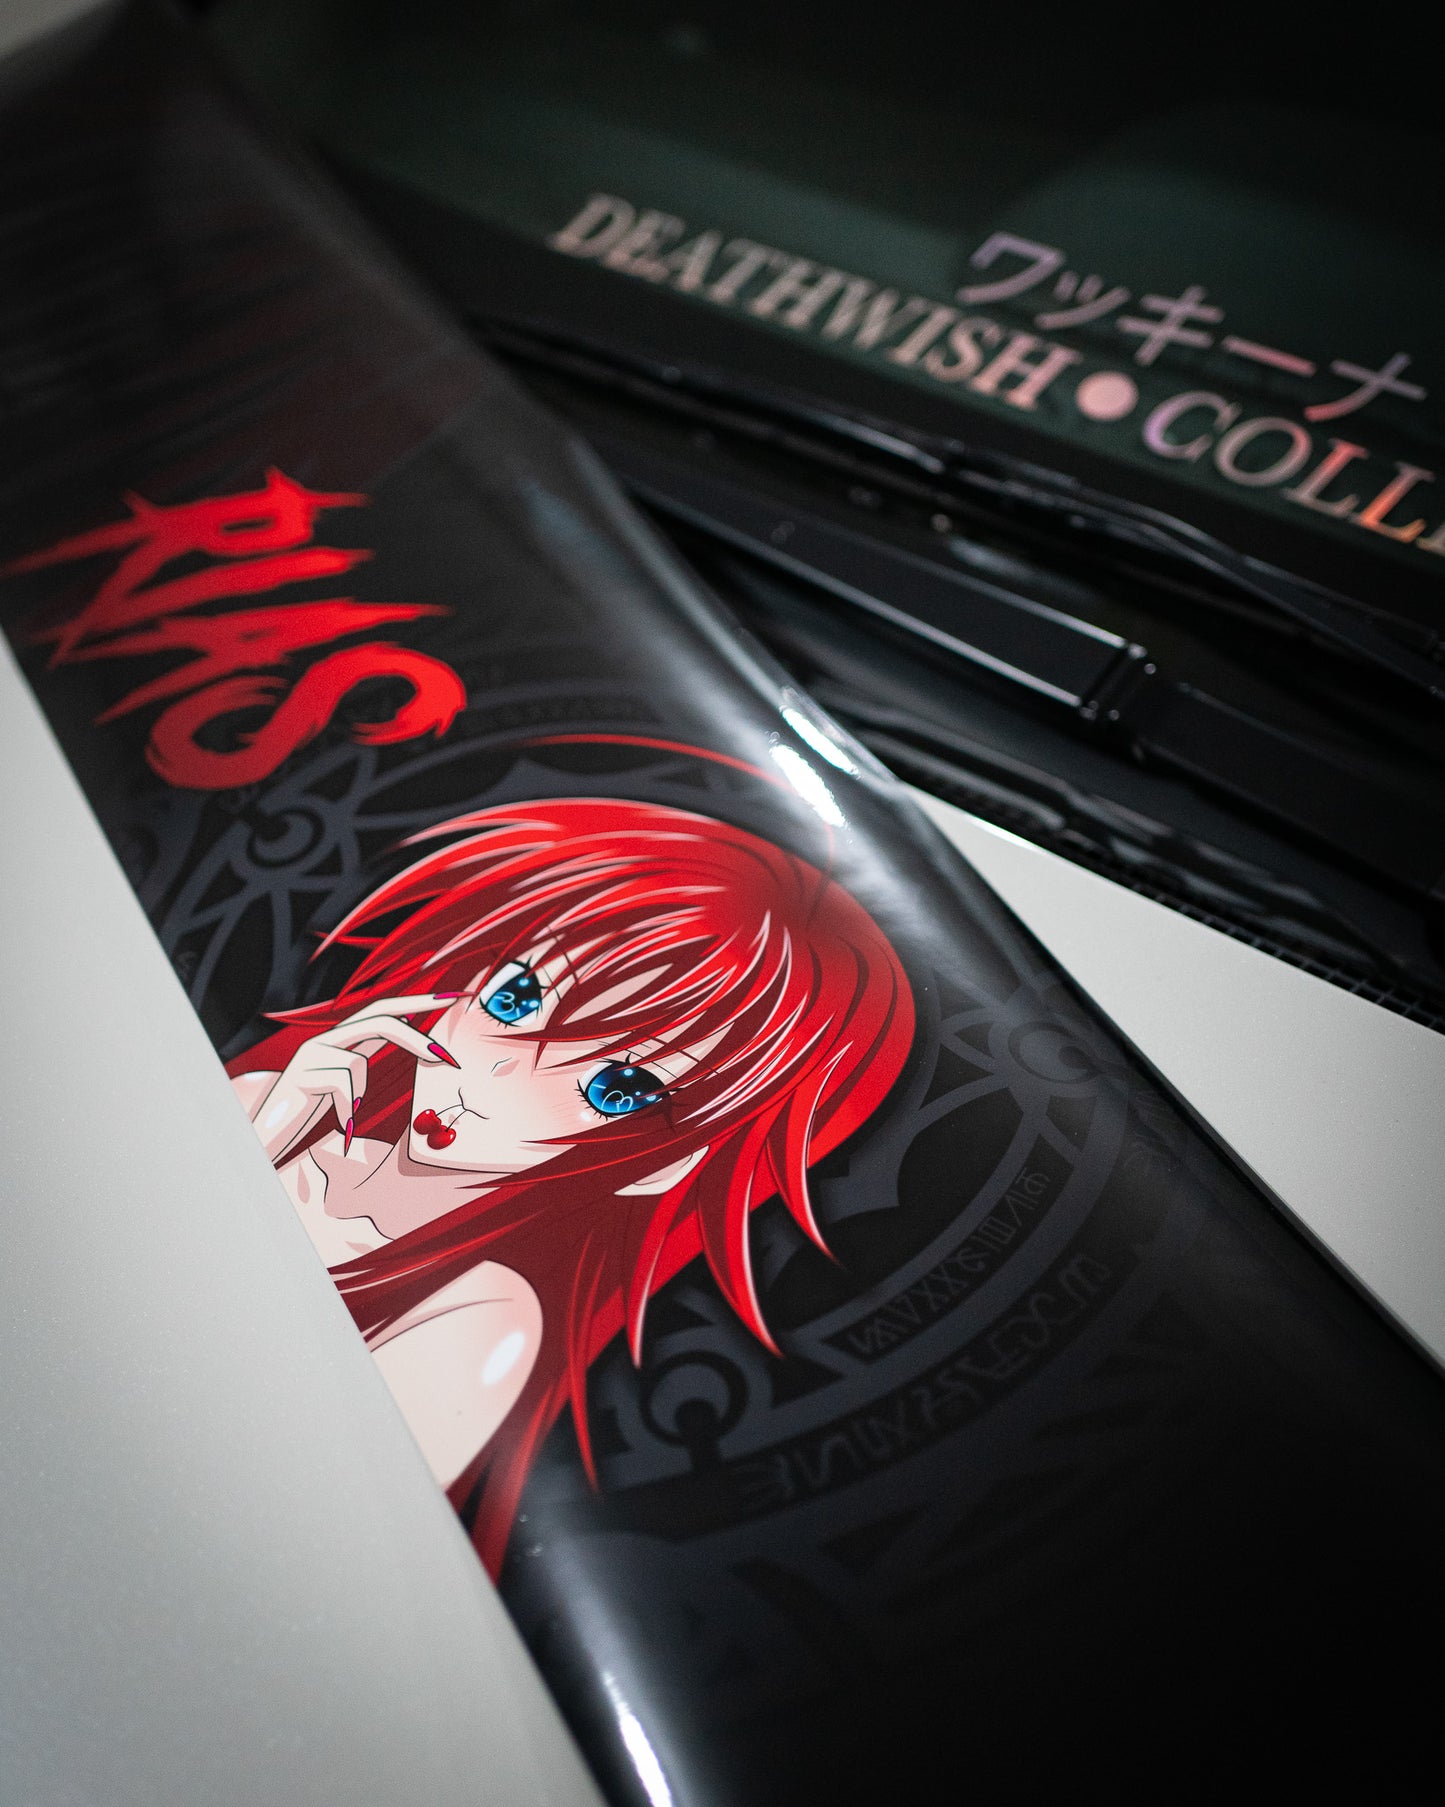 Rias Gremory Banner